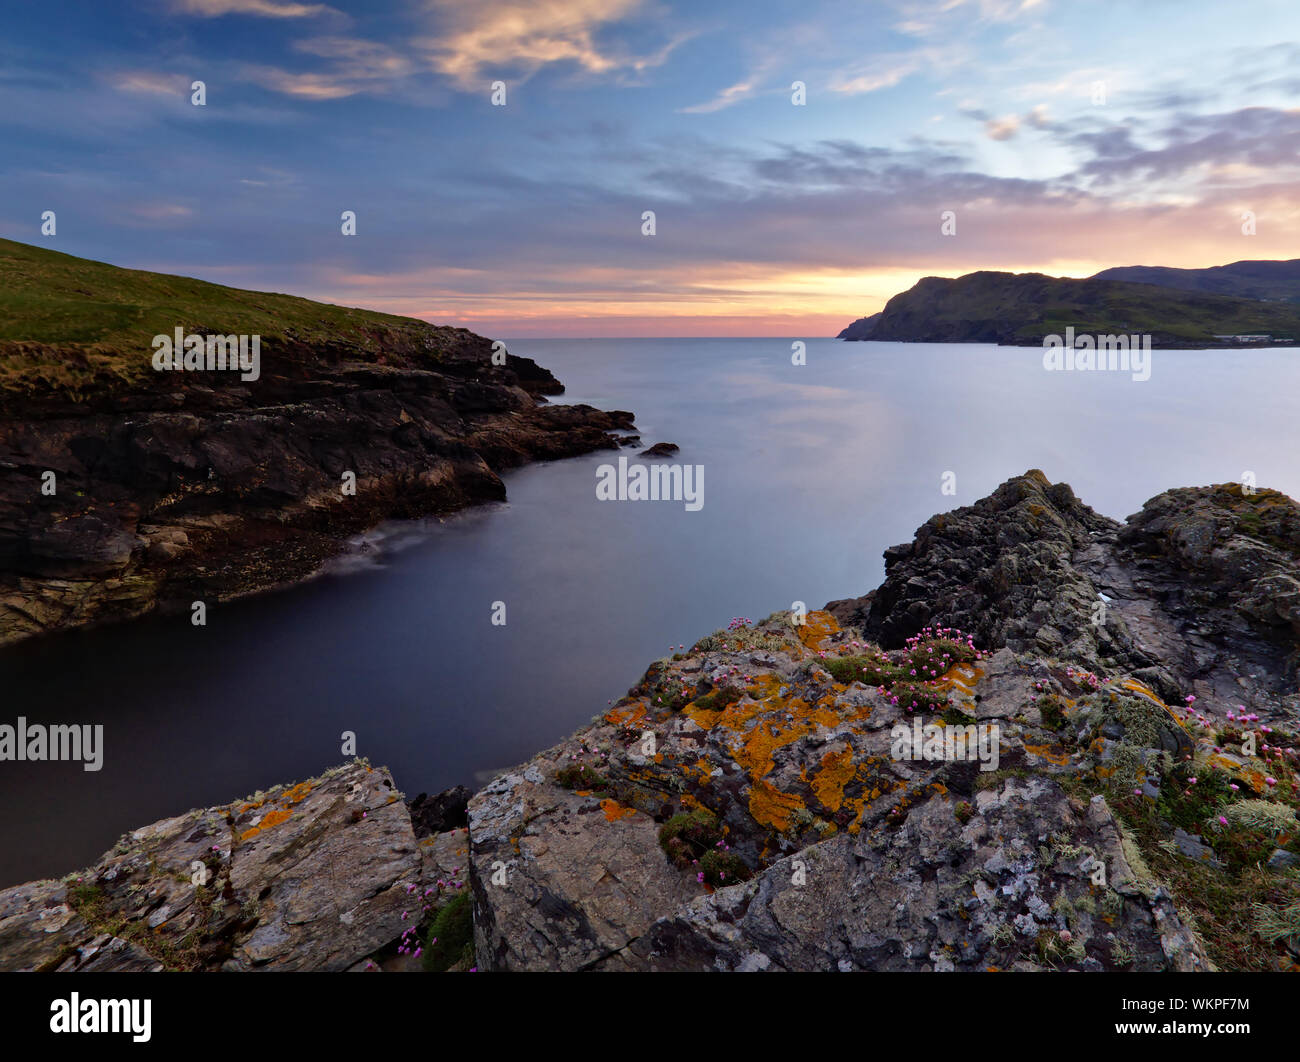 The rocky shores of Tawny Bay, Co. Donegal on the Irish west coast at sunset. Stock Photo